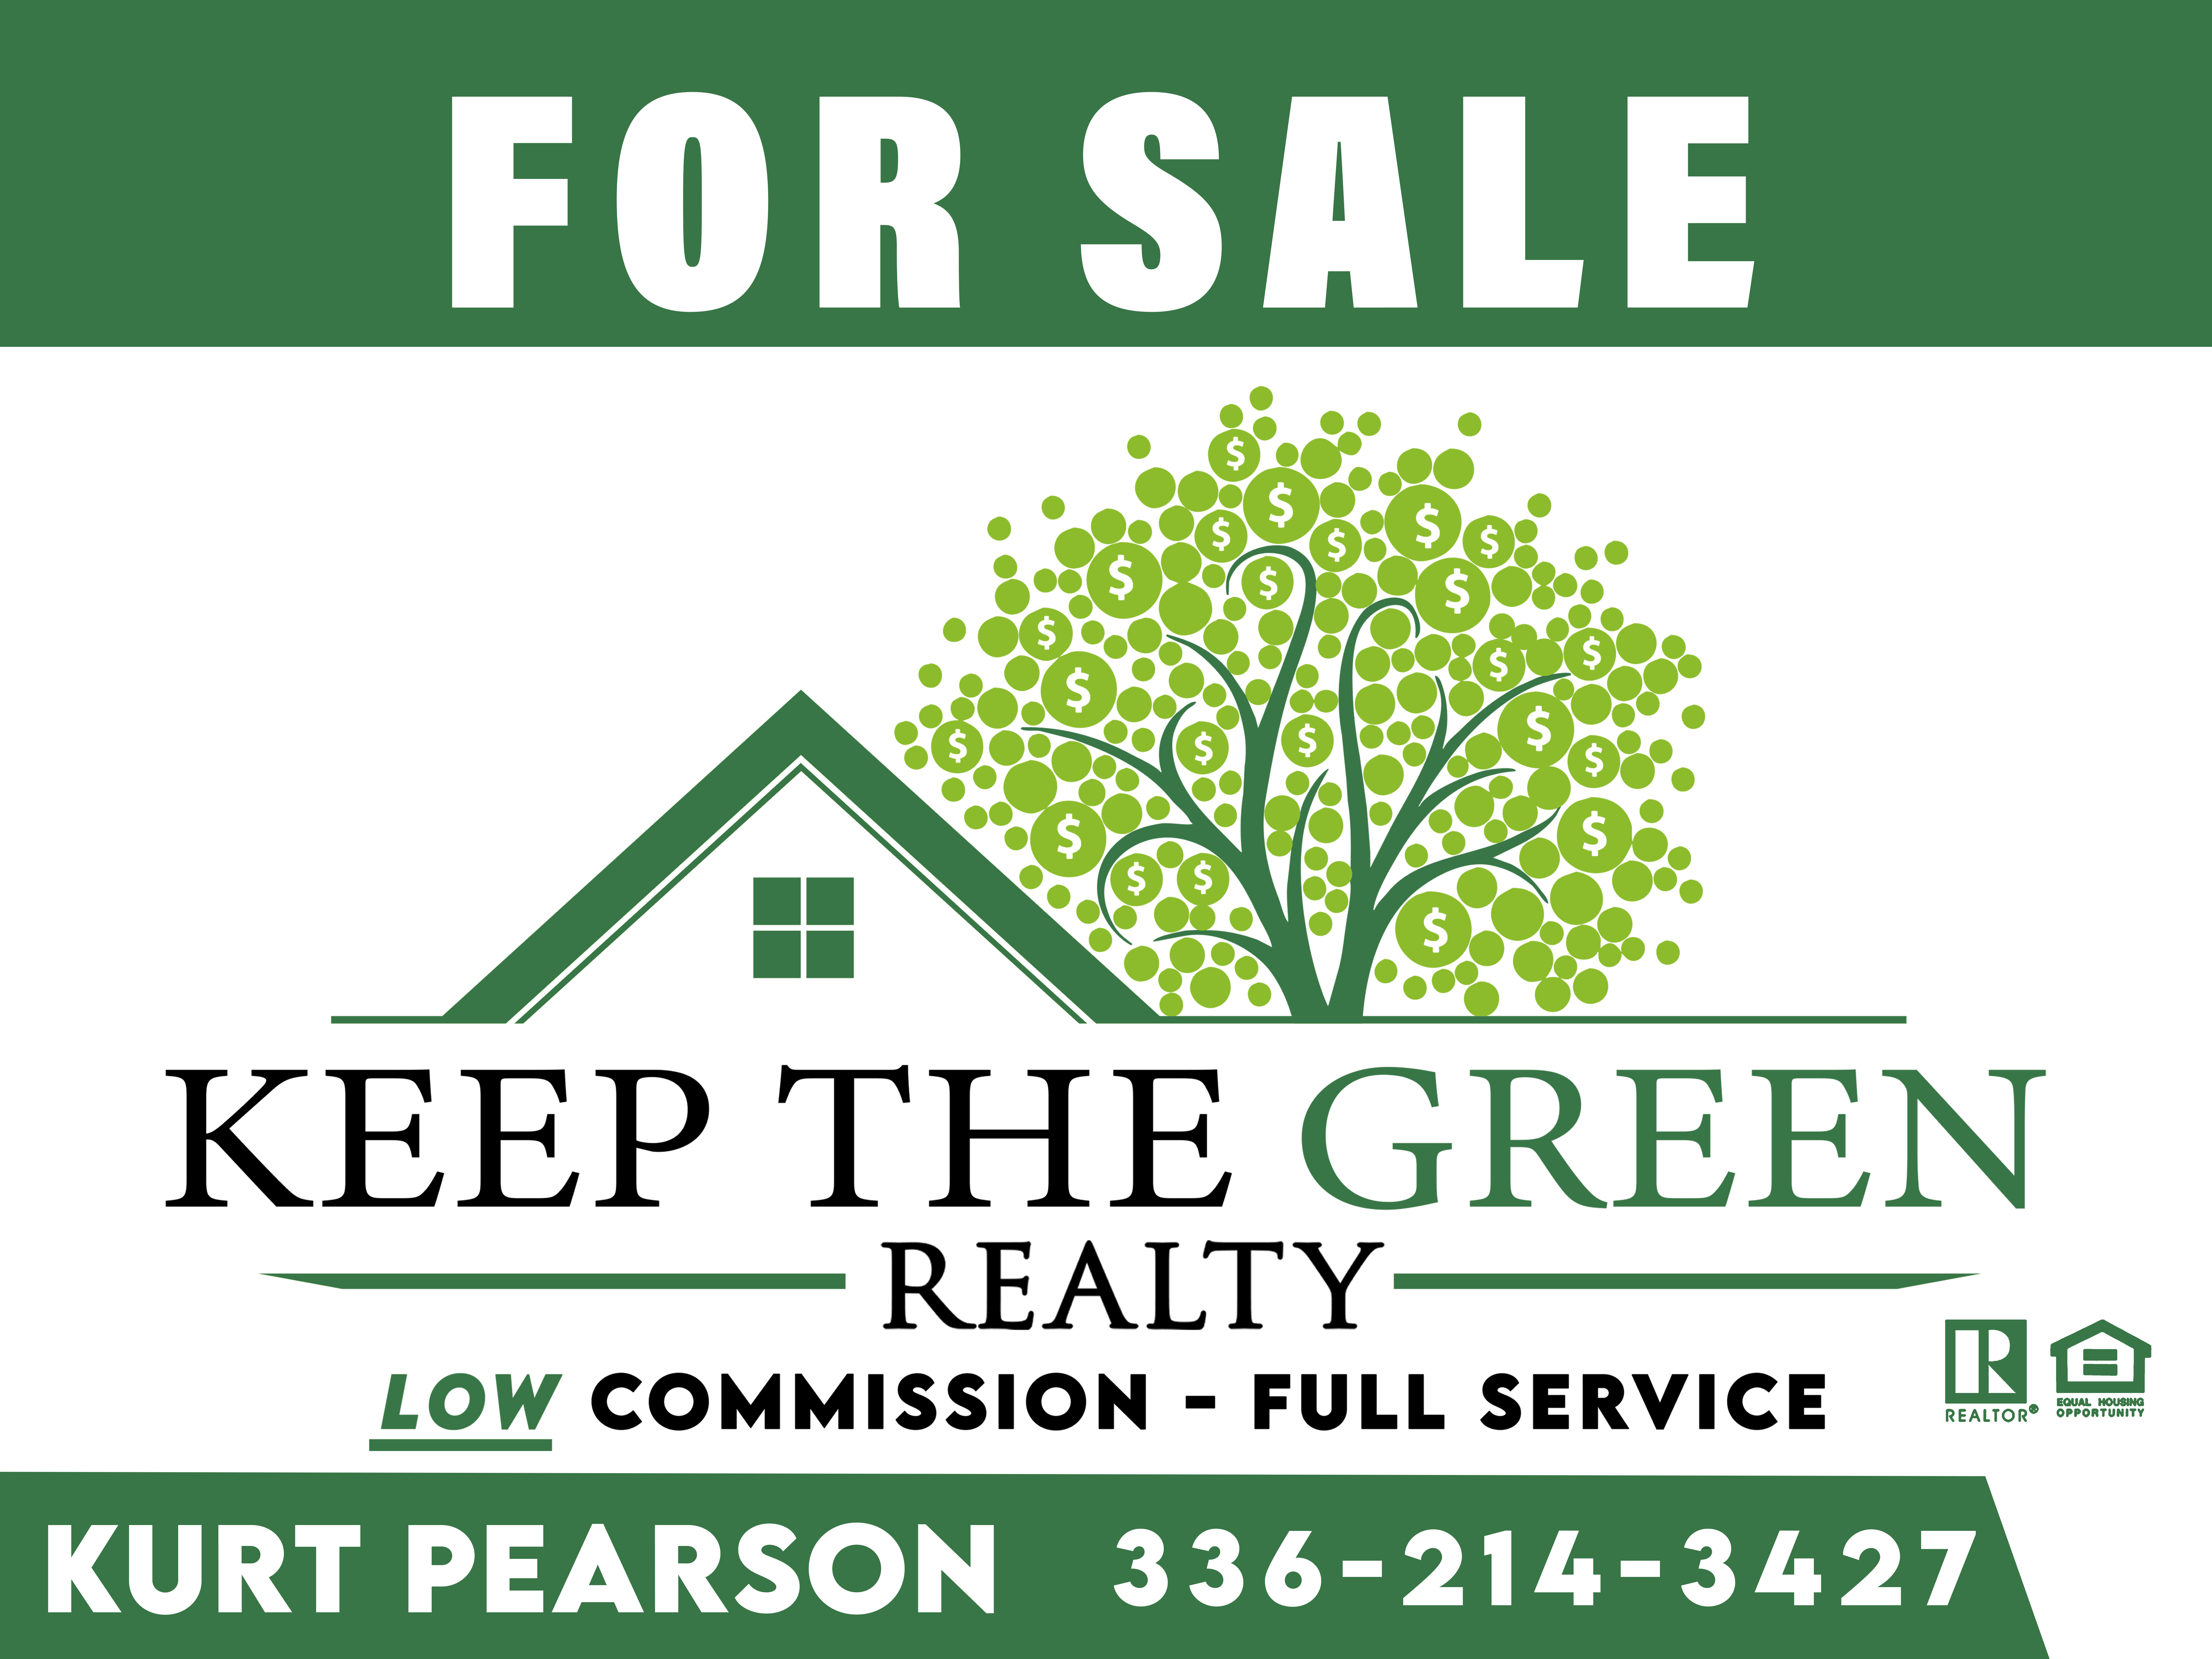 Keep the Green Realty, For Sale